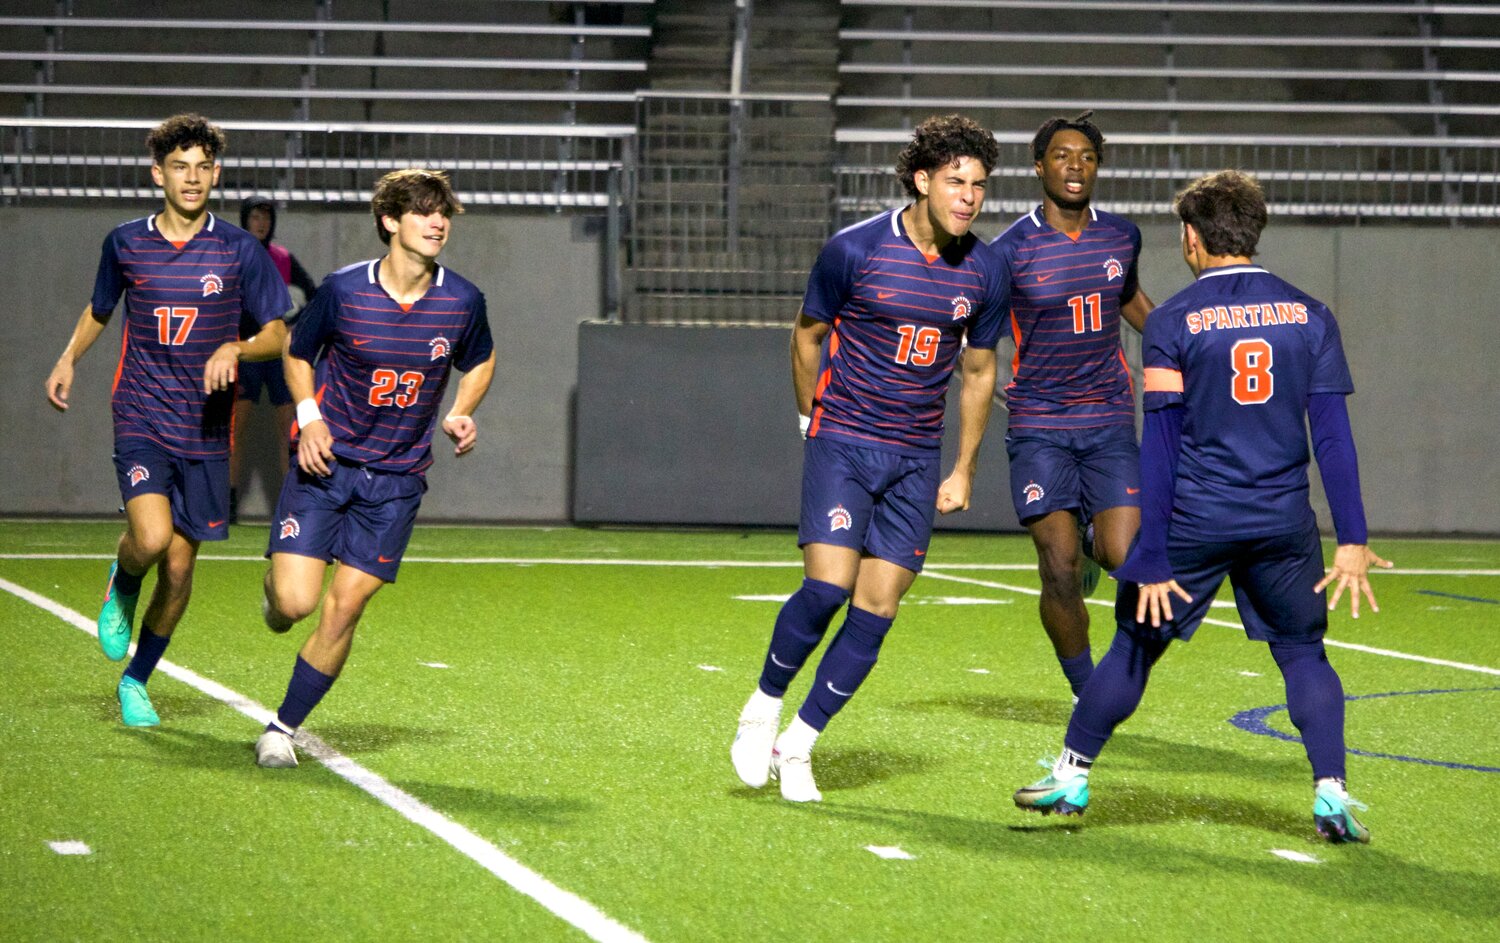 Jesus Duque and Fernando Lazo celebrate after Duque scored a goal during Friday’s game between Seven Lakes and Jordan at Legacy Stadium.